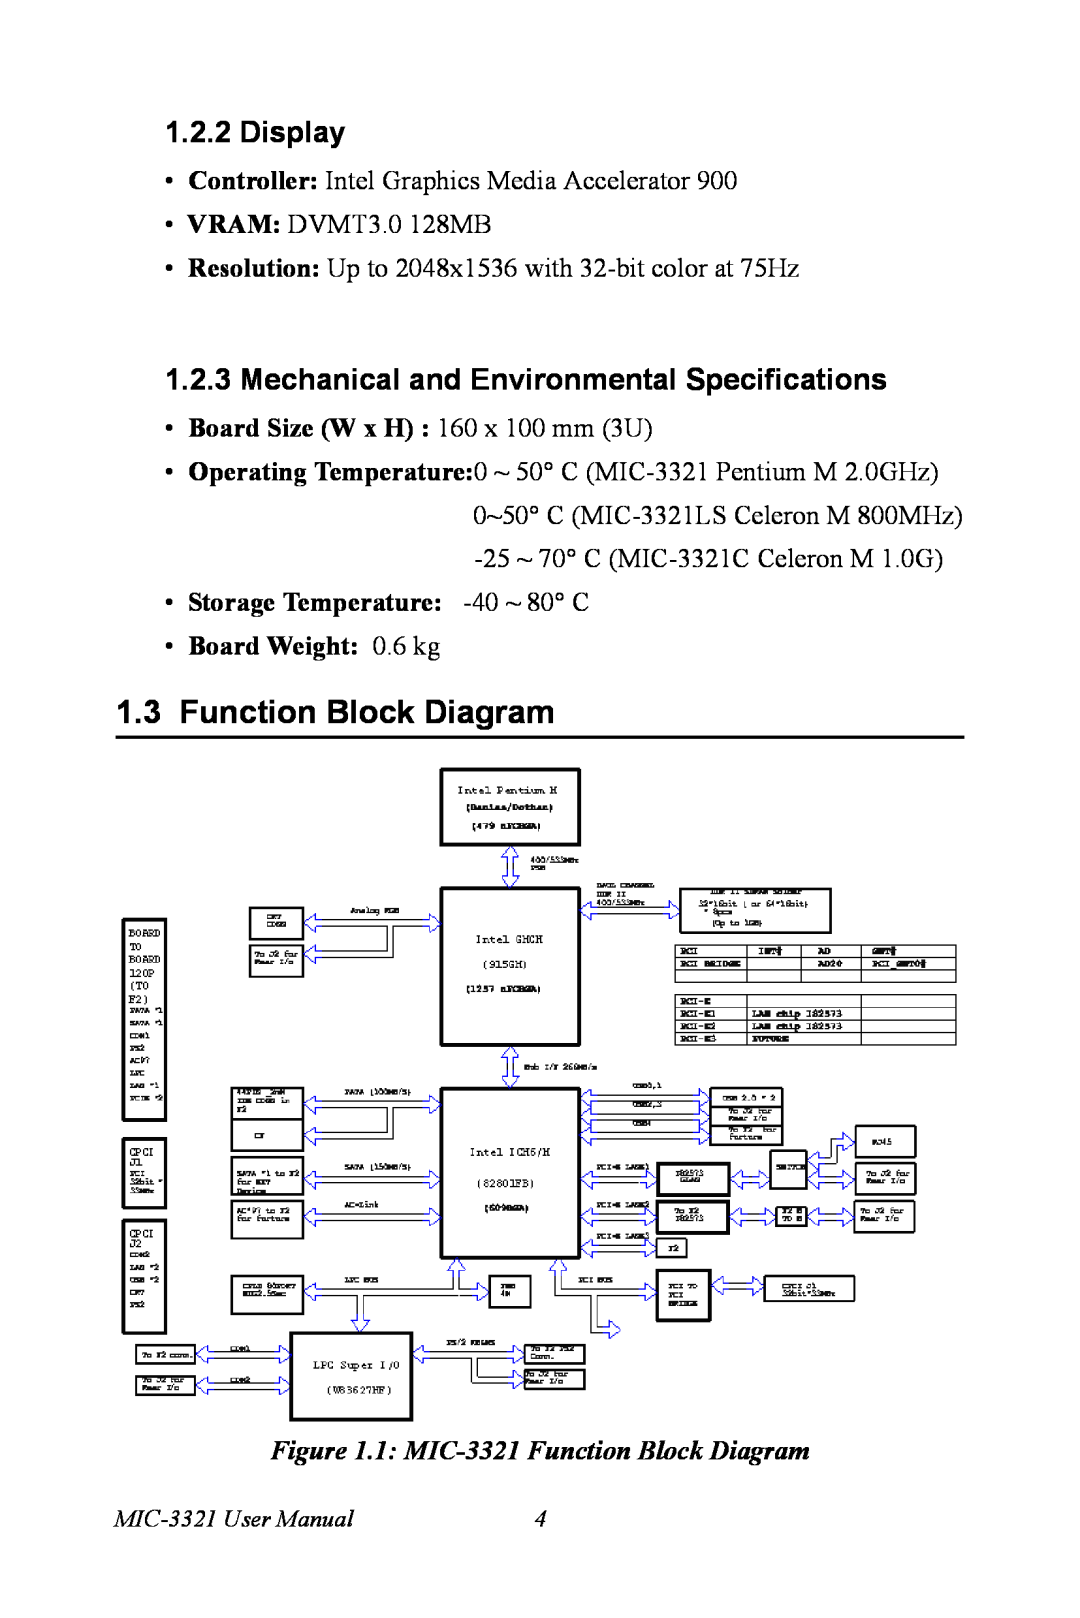 Intel MIC-3321 1.3Function Block Diagram, Display, 1.2.3Mechanical and Environmental Specifications, •Board Weight: 0.6 kg 